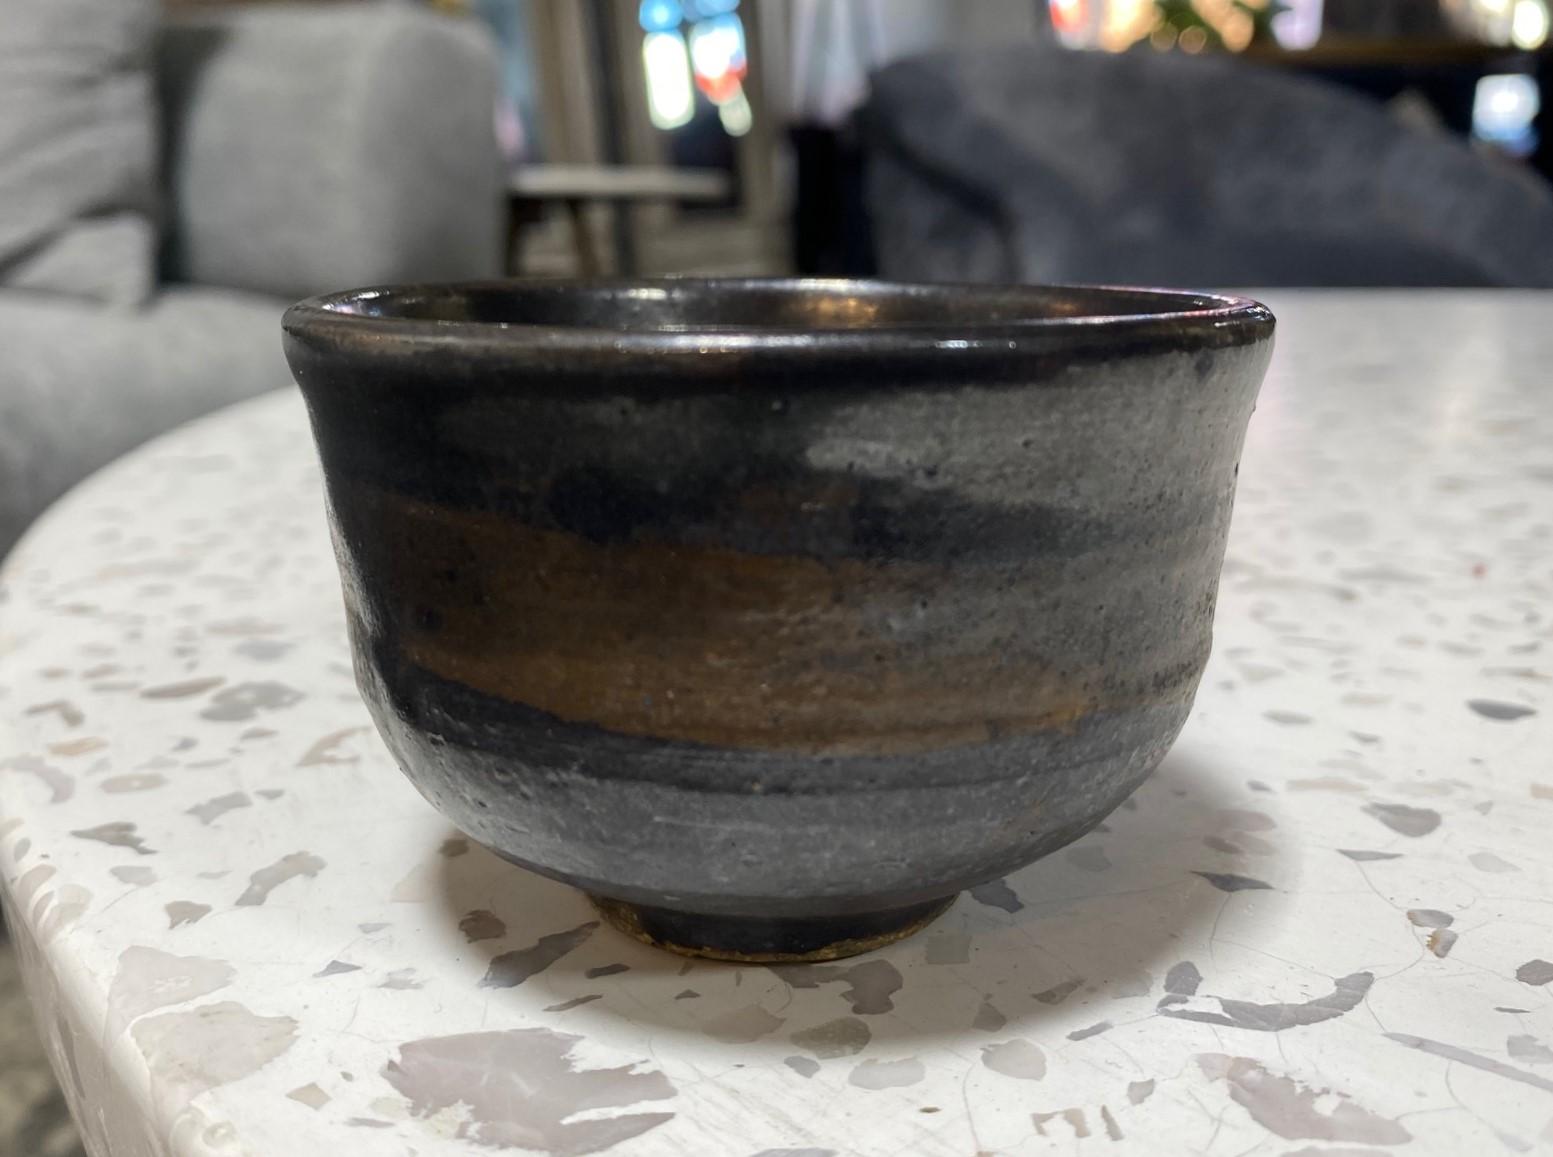 An absolutely gorgeous and wonderful chawan tea bowl / yunomi cup by famed Japanese American pottery master Toshiko Takaezu. The work features a rich, matte black tenmoku glaze with splashes of brushed colors. It is a unique and one-of-a-kind work